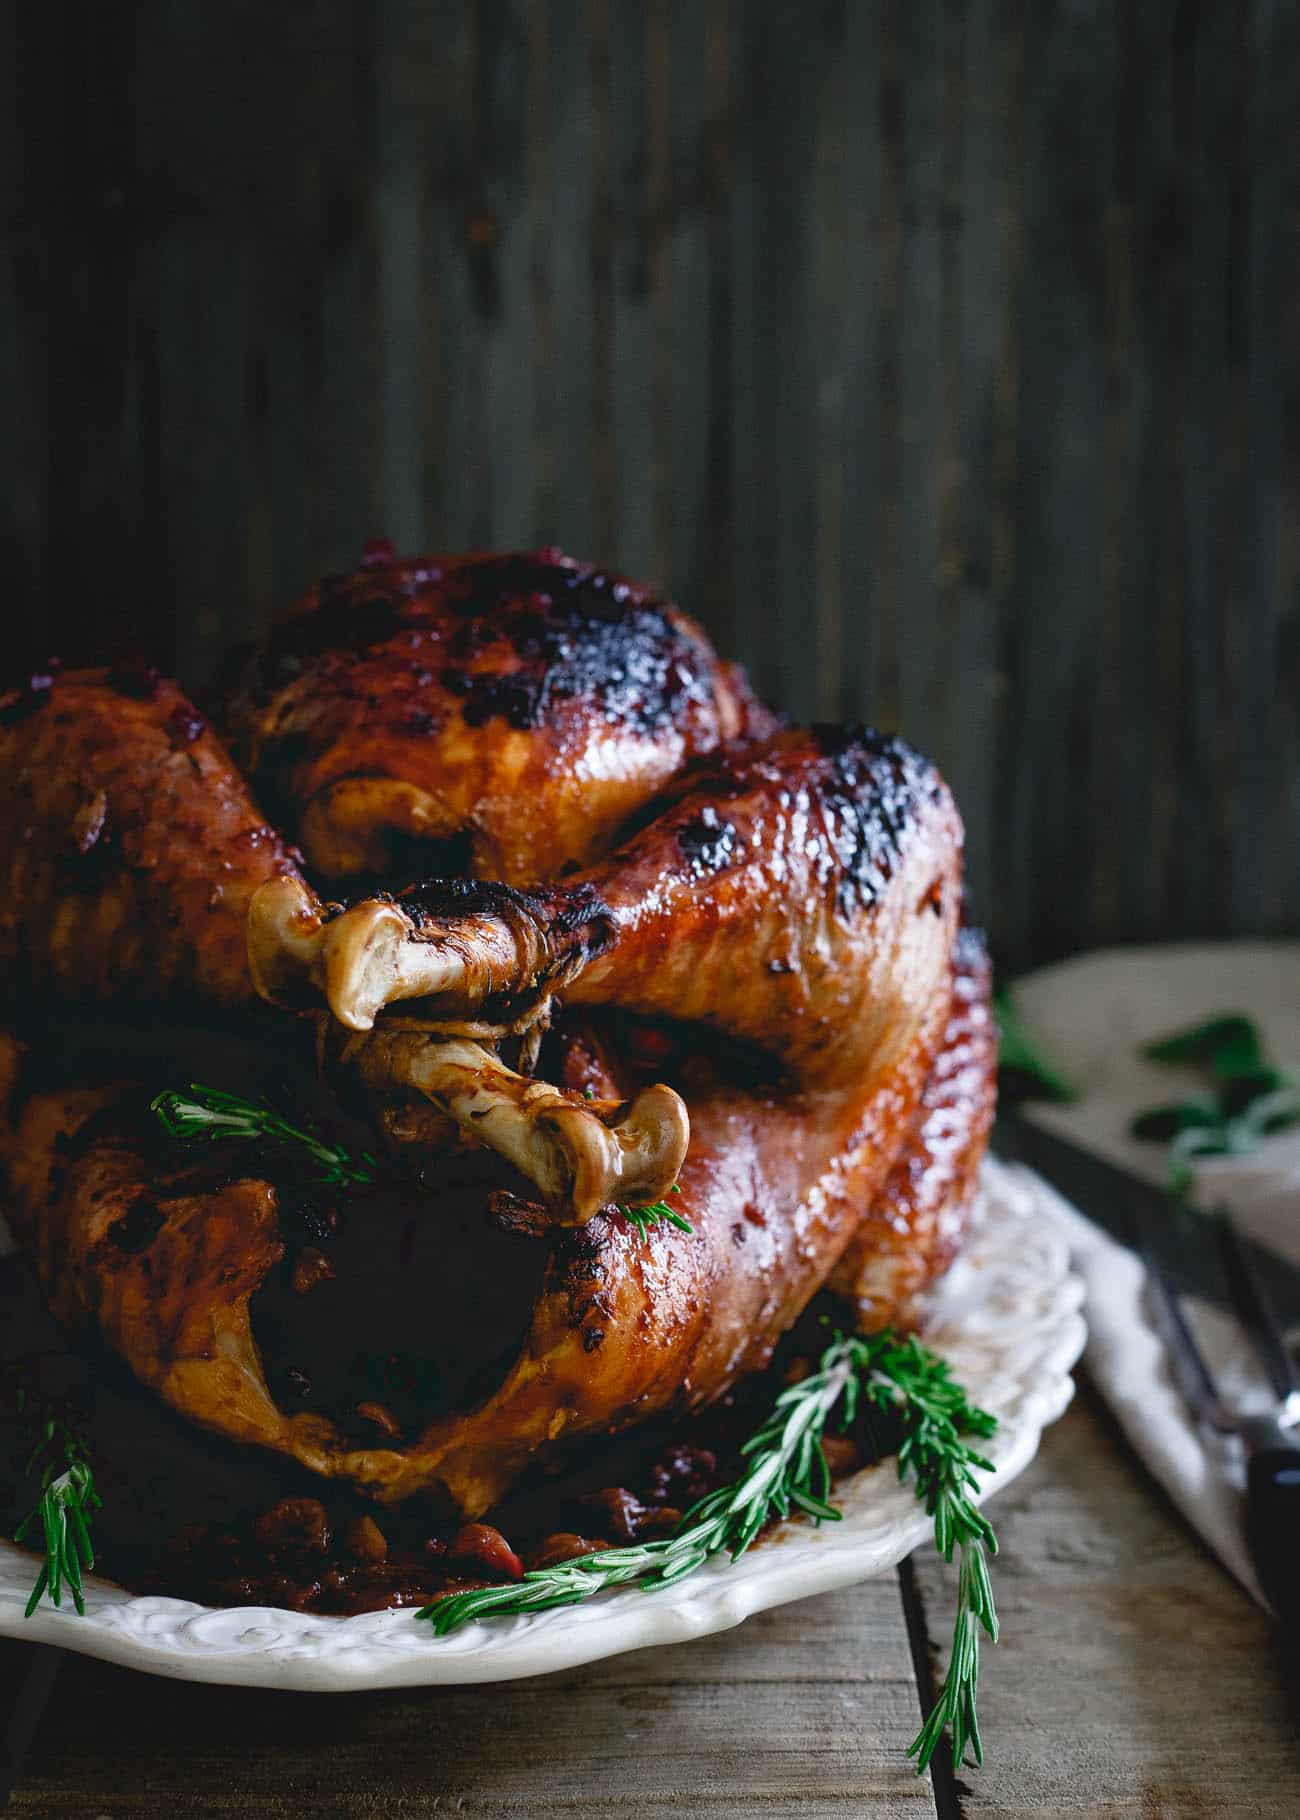 This cherry cranberry glazed turkey is perfect for your Thanksgiving table. The slightly sweet and sticky glaze gives the bird tons of festive flavor!